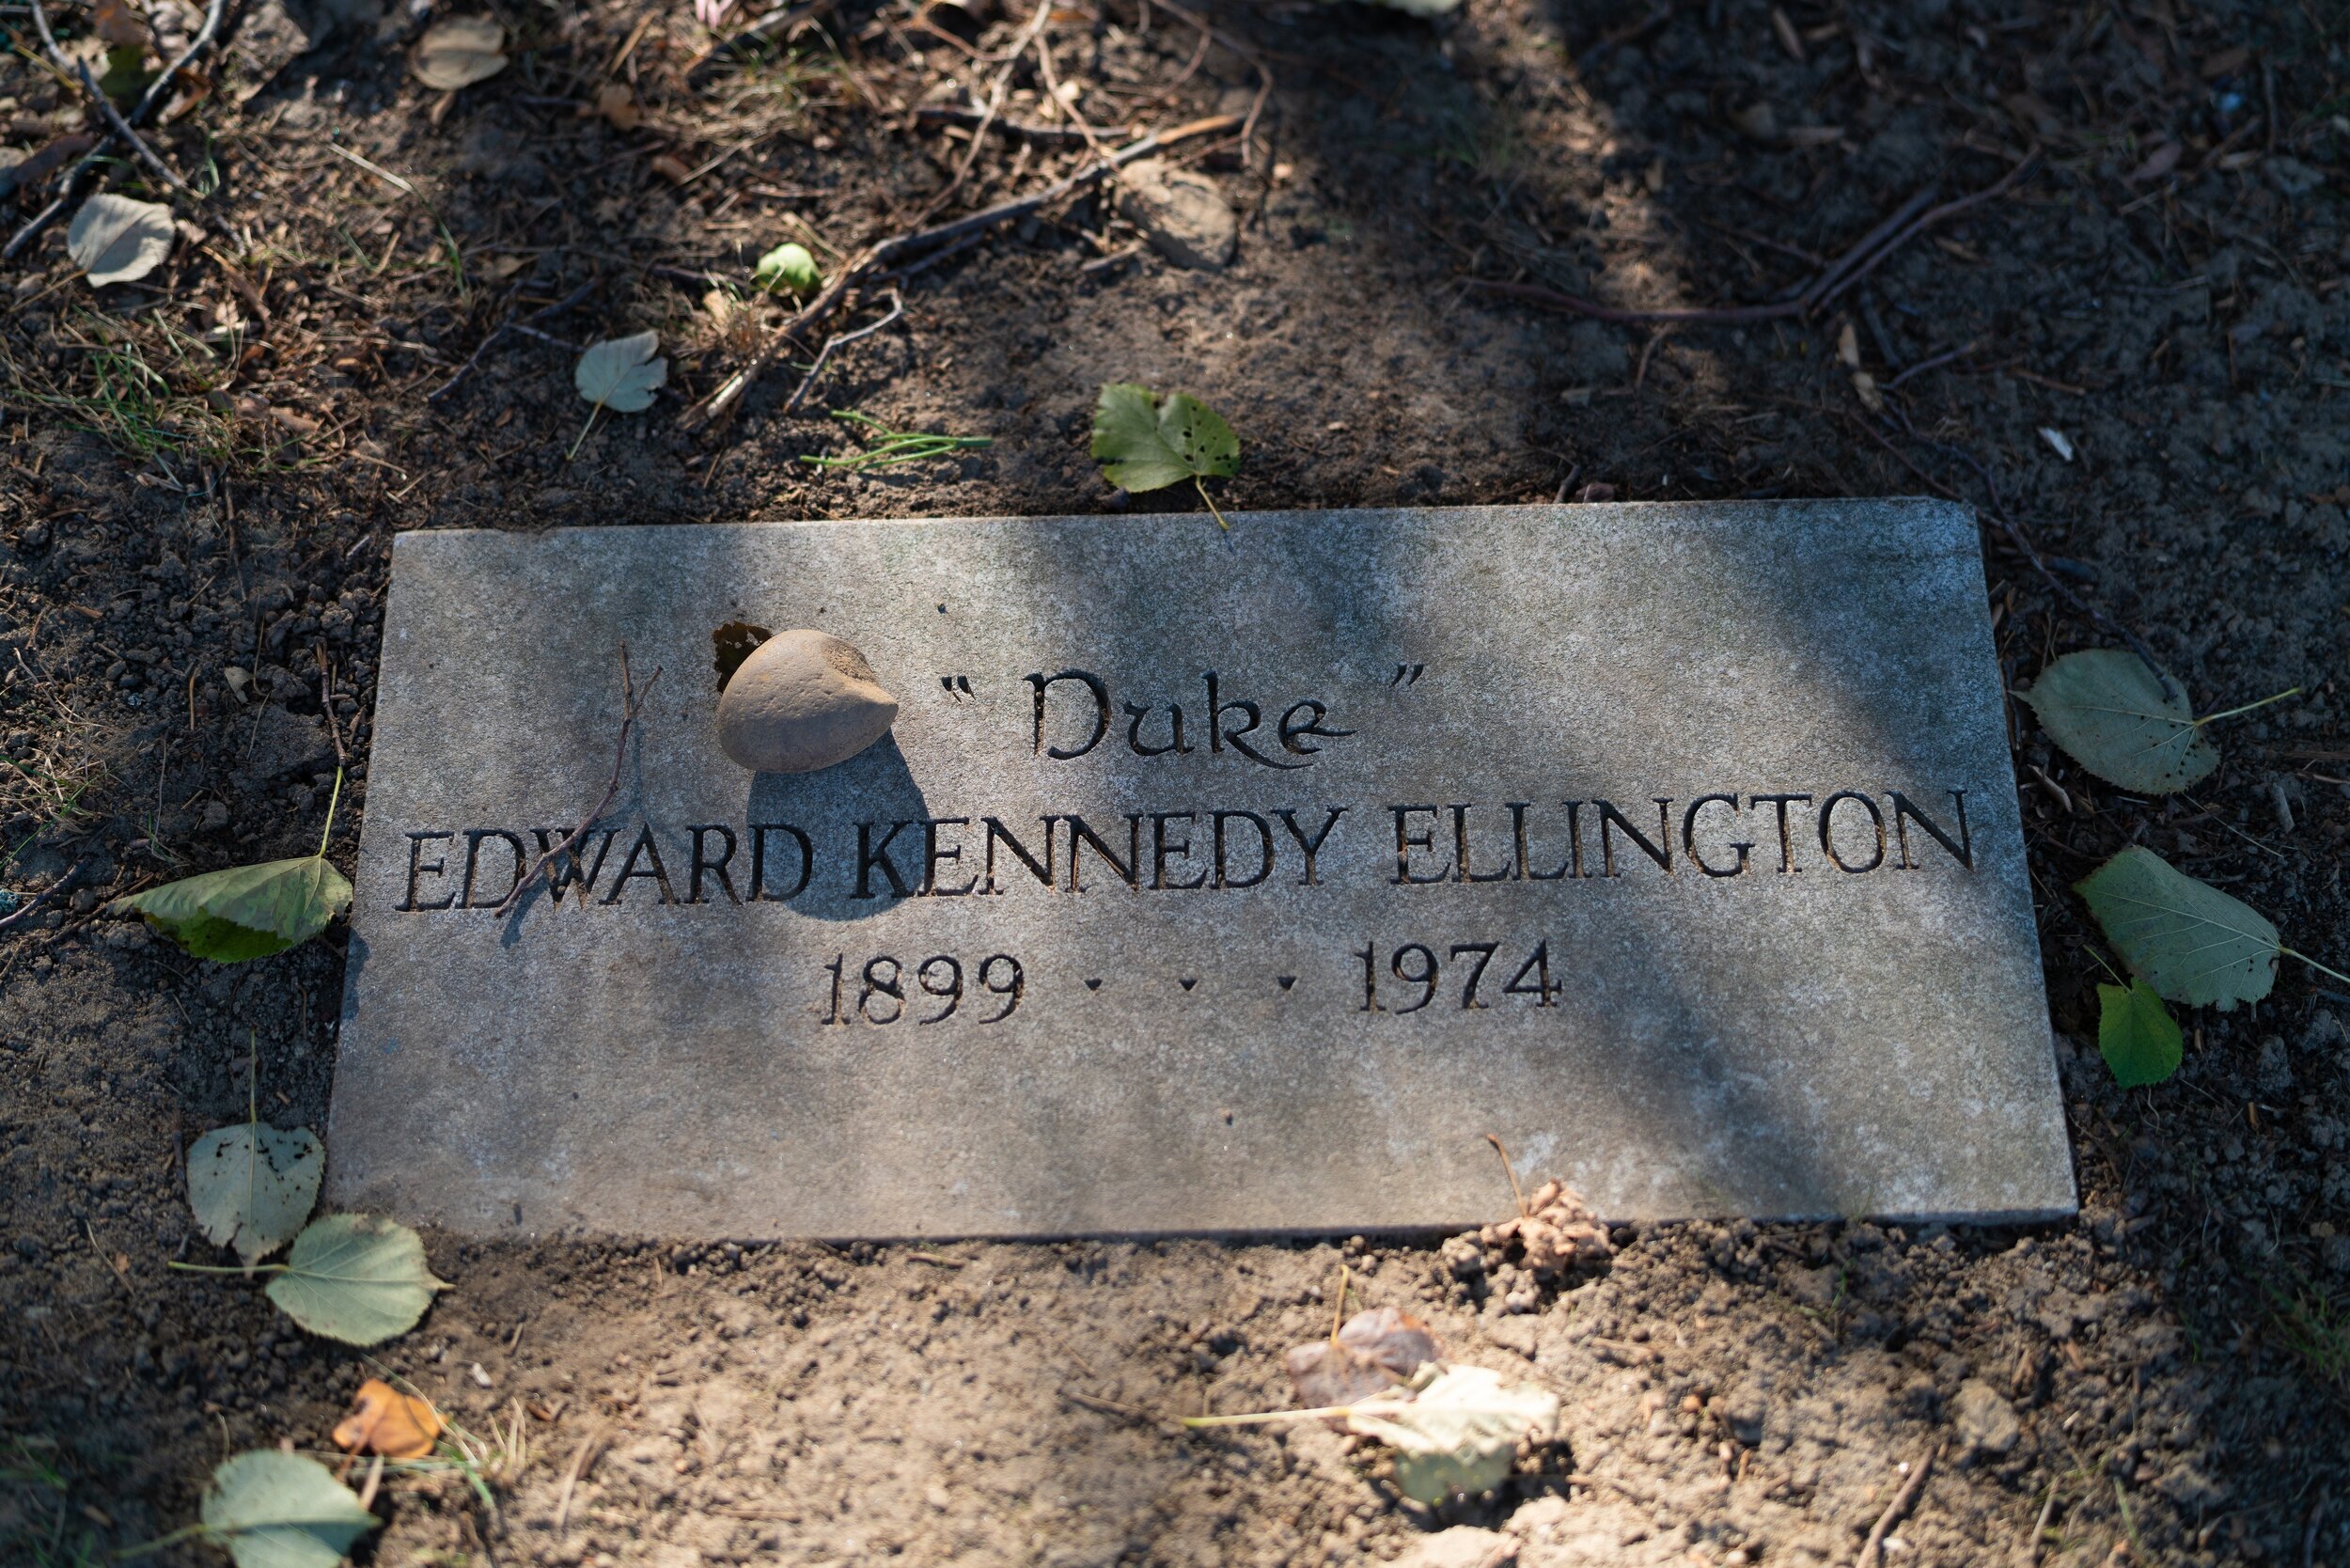   Jazz legend Duke Ellington is one of Woodlawn's most visited residents, along with Miles Davis.  